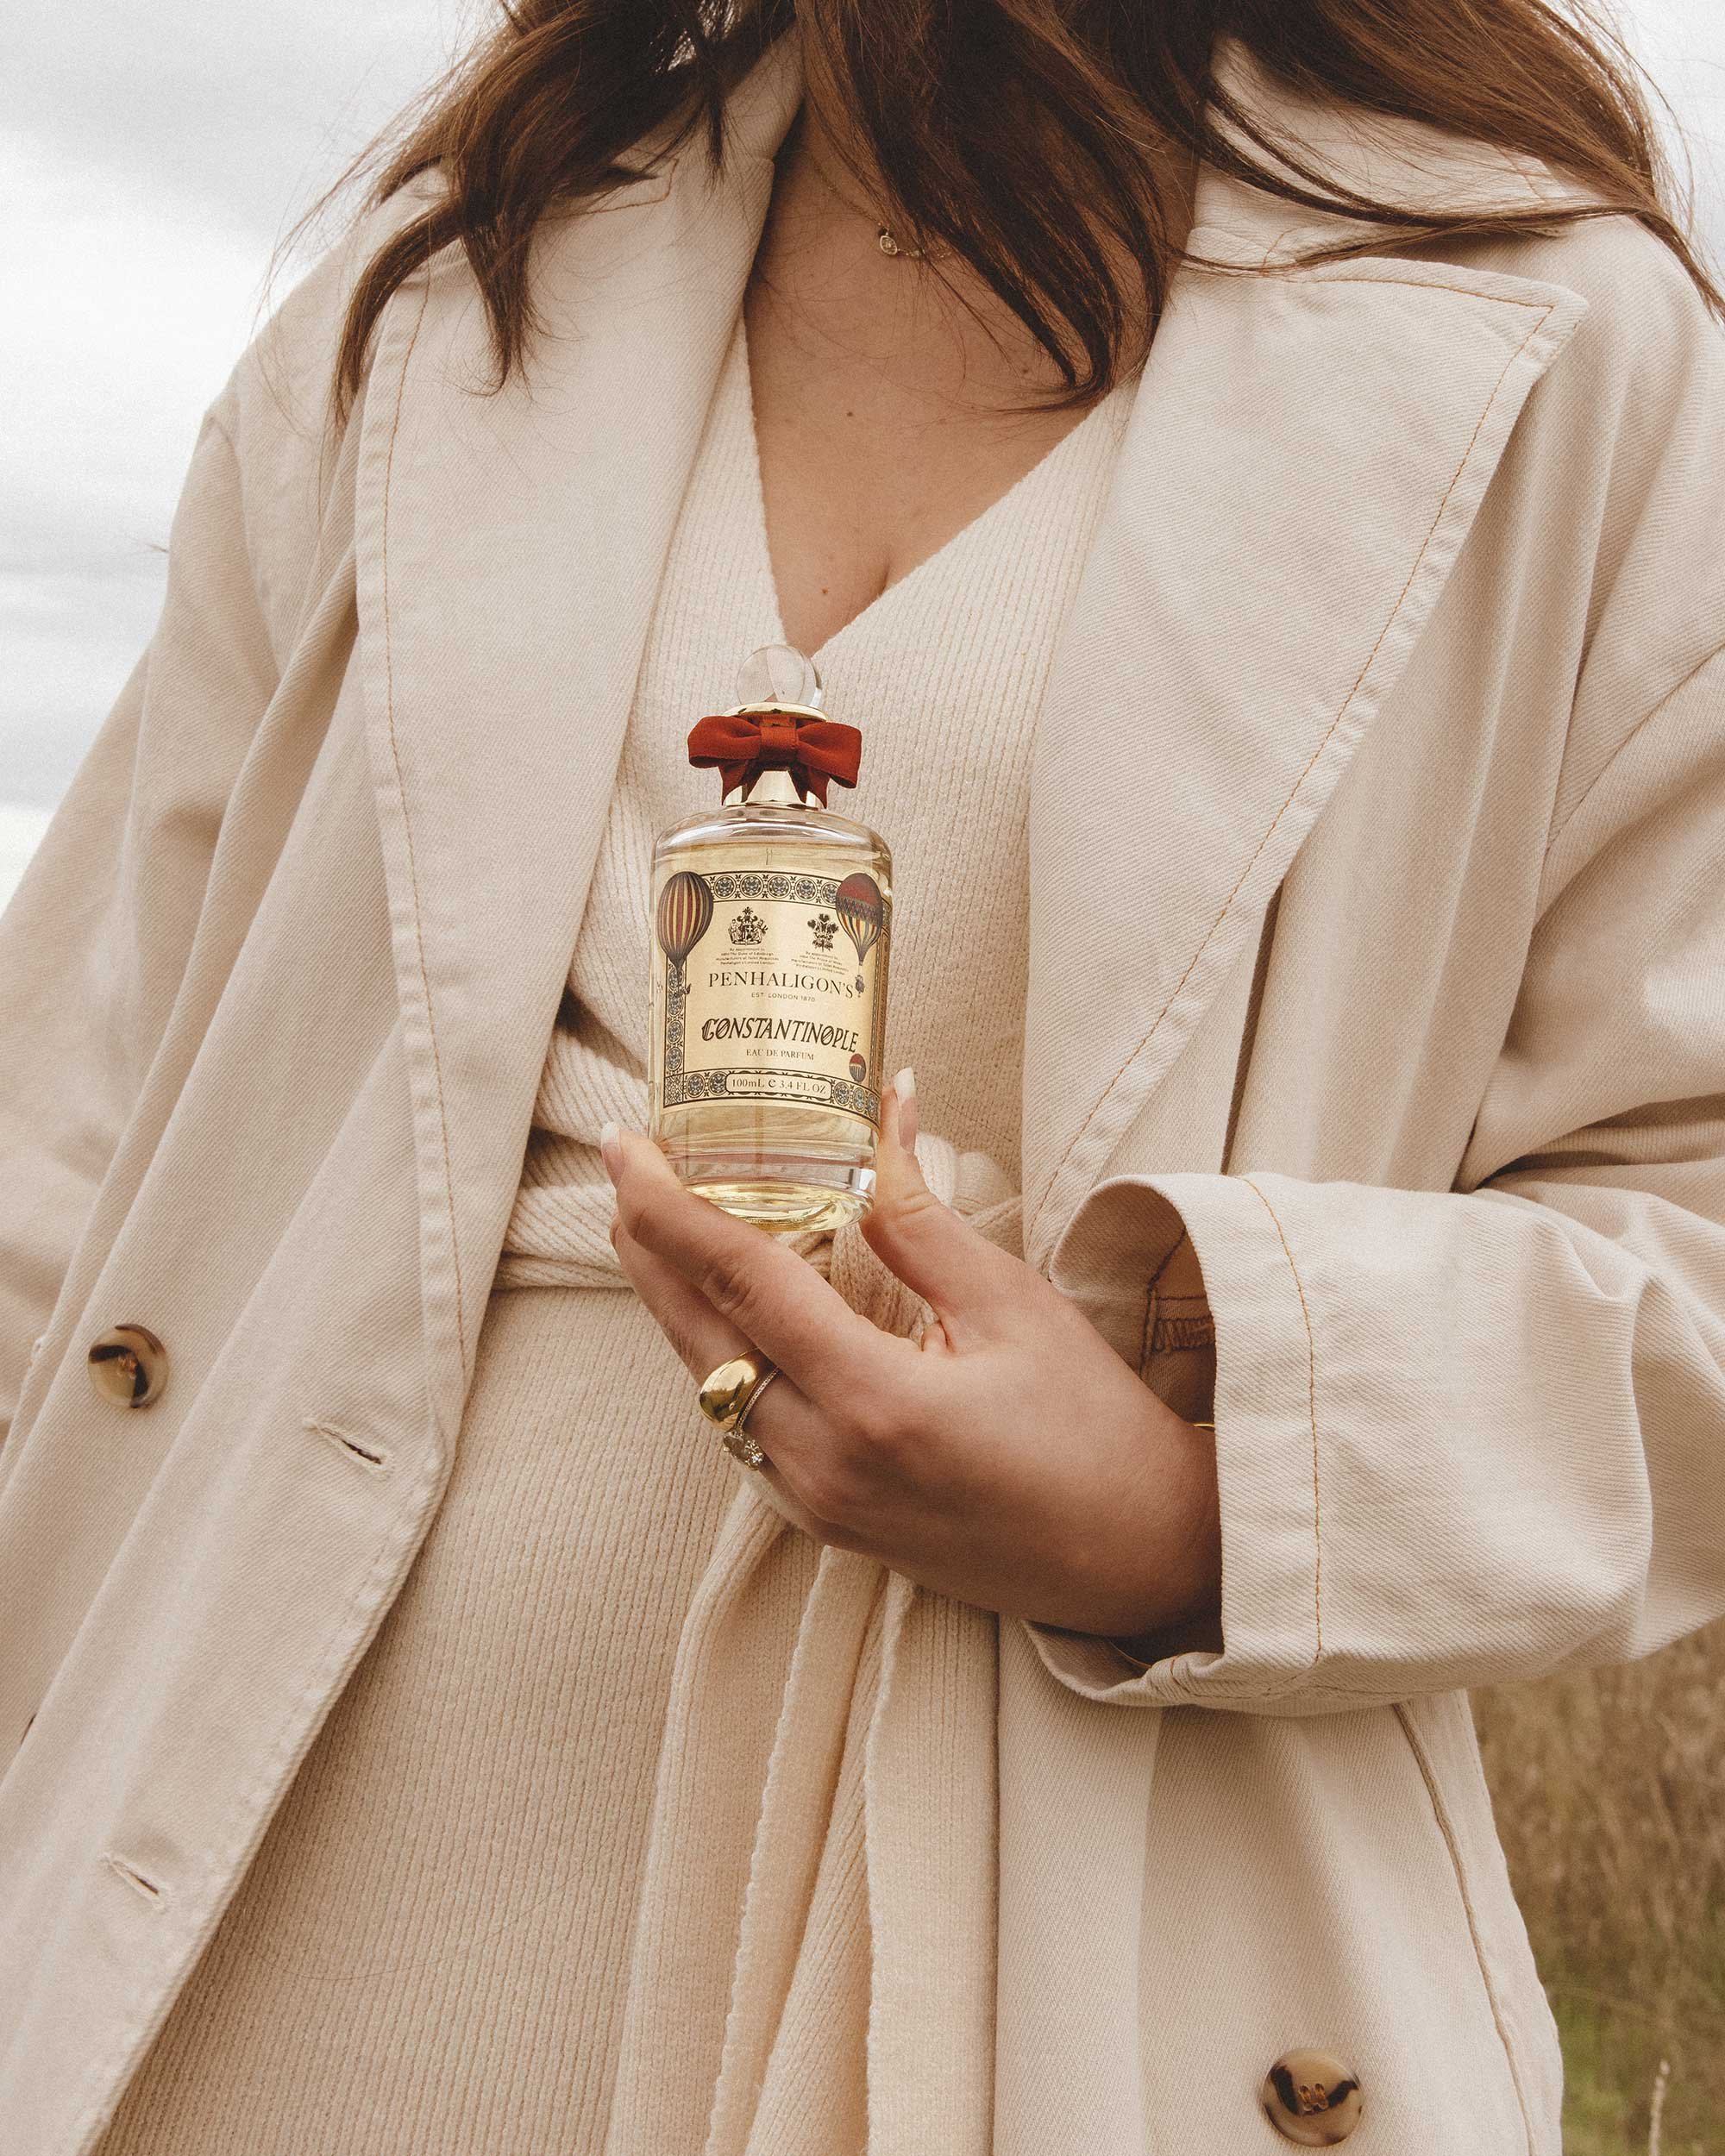 Neutral Fall Outfit Idea. Sarah Butler of @sarahchristine wearing Penhaligon Constantinople Eau De Parfum A fragrance created for the Queen of Cities, where elegant florals collide with warm, earthy aromas in Seattle, Washington. 2.jpg